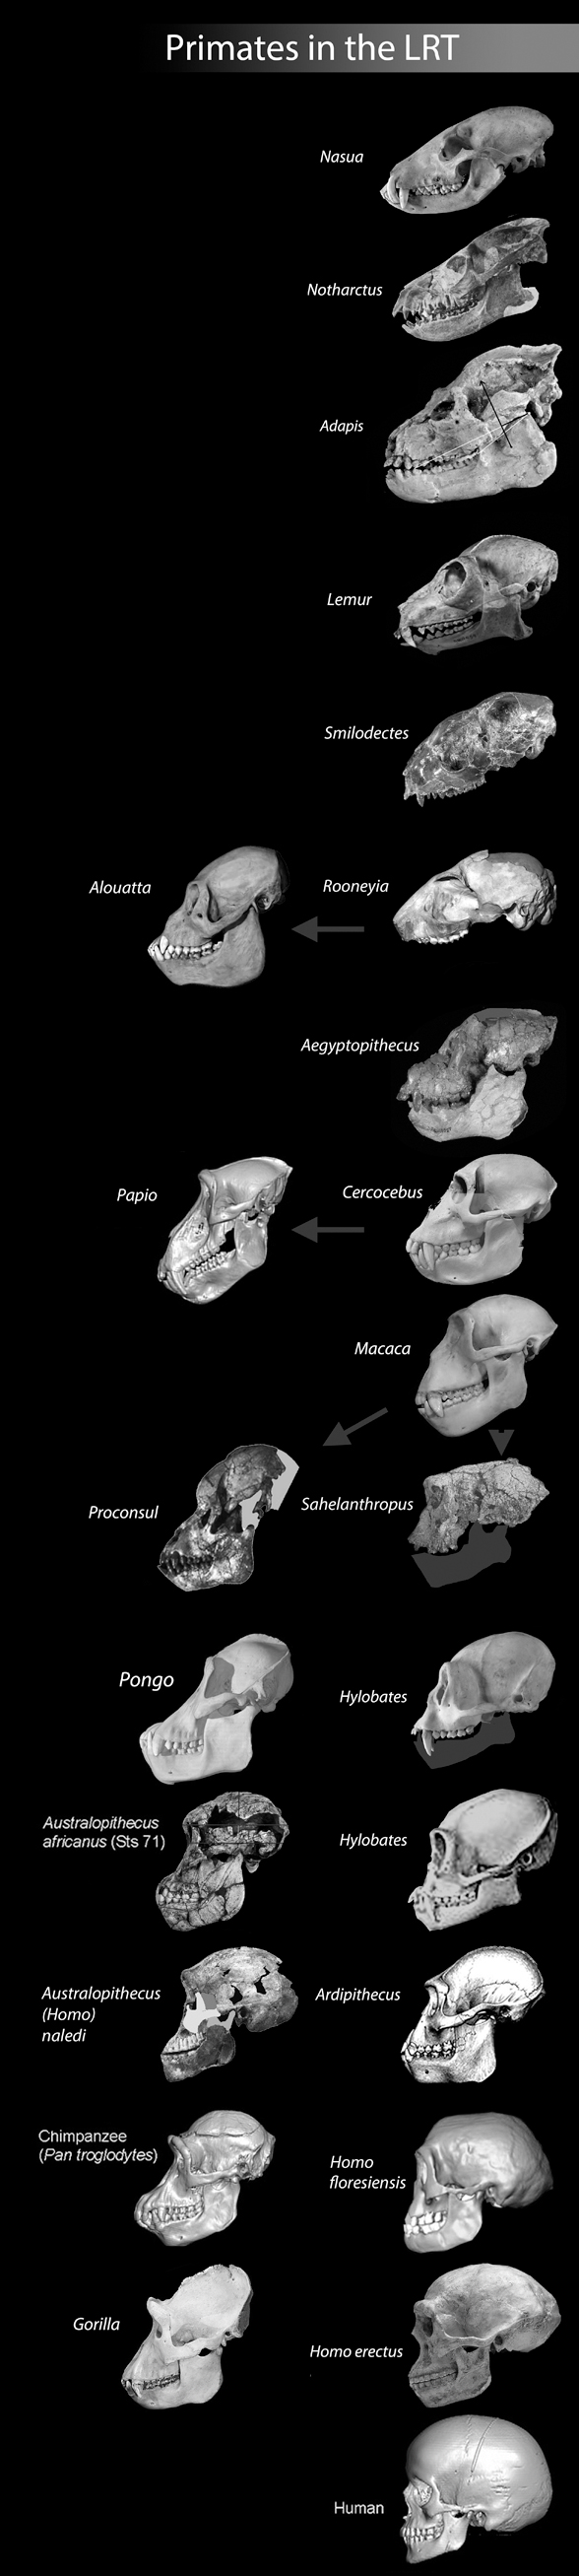 Ardipithecus, Hylobates and Homo in phylogenetic order